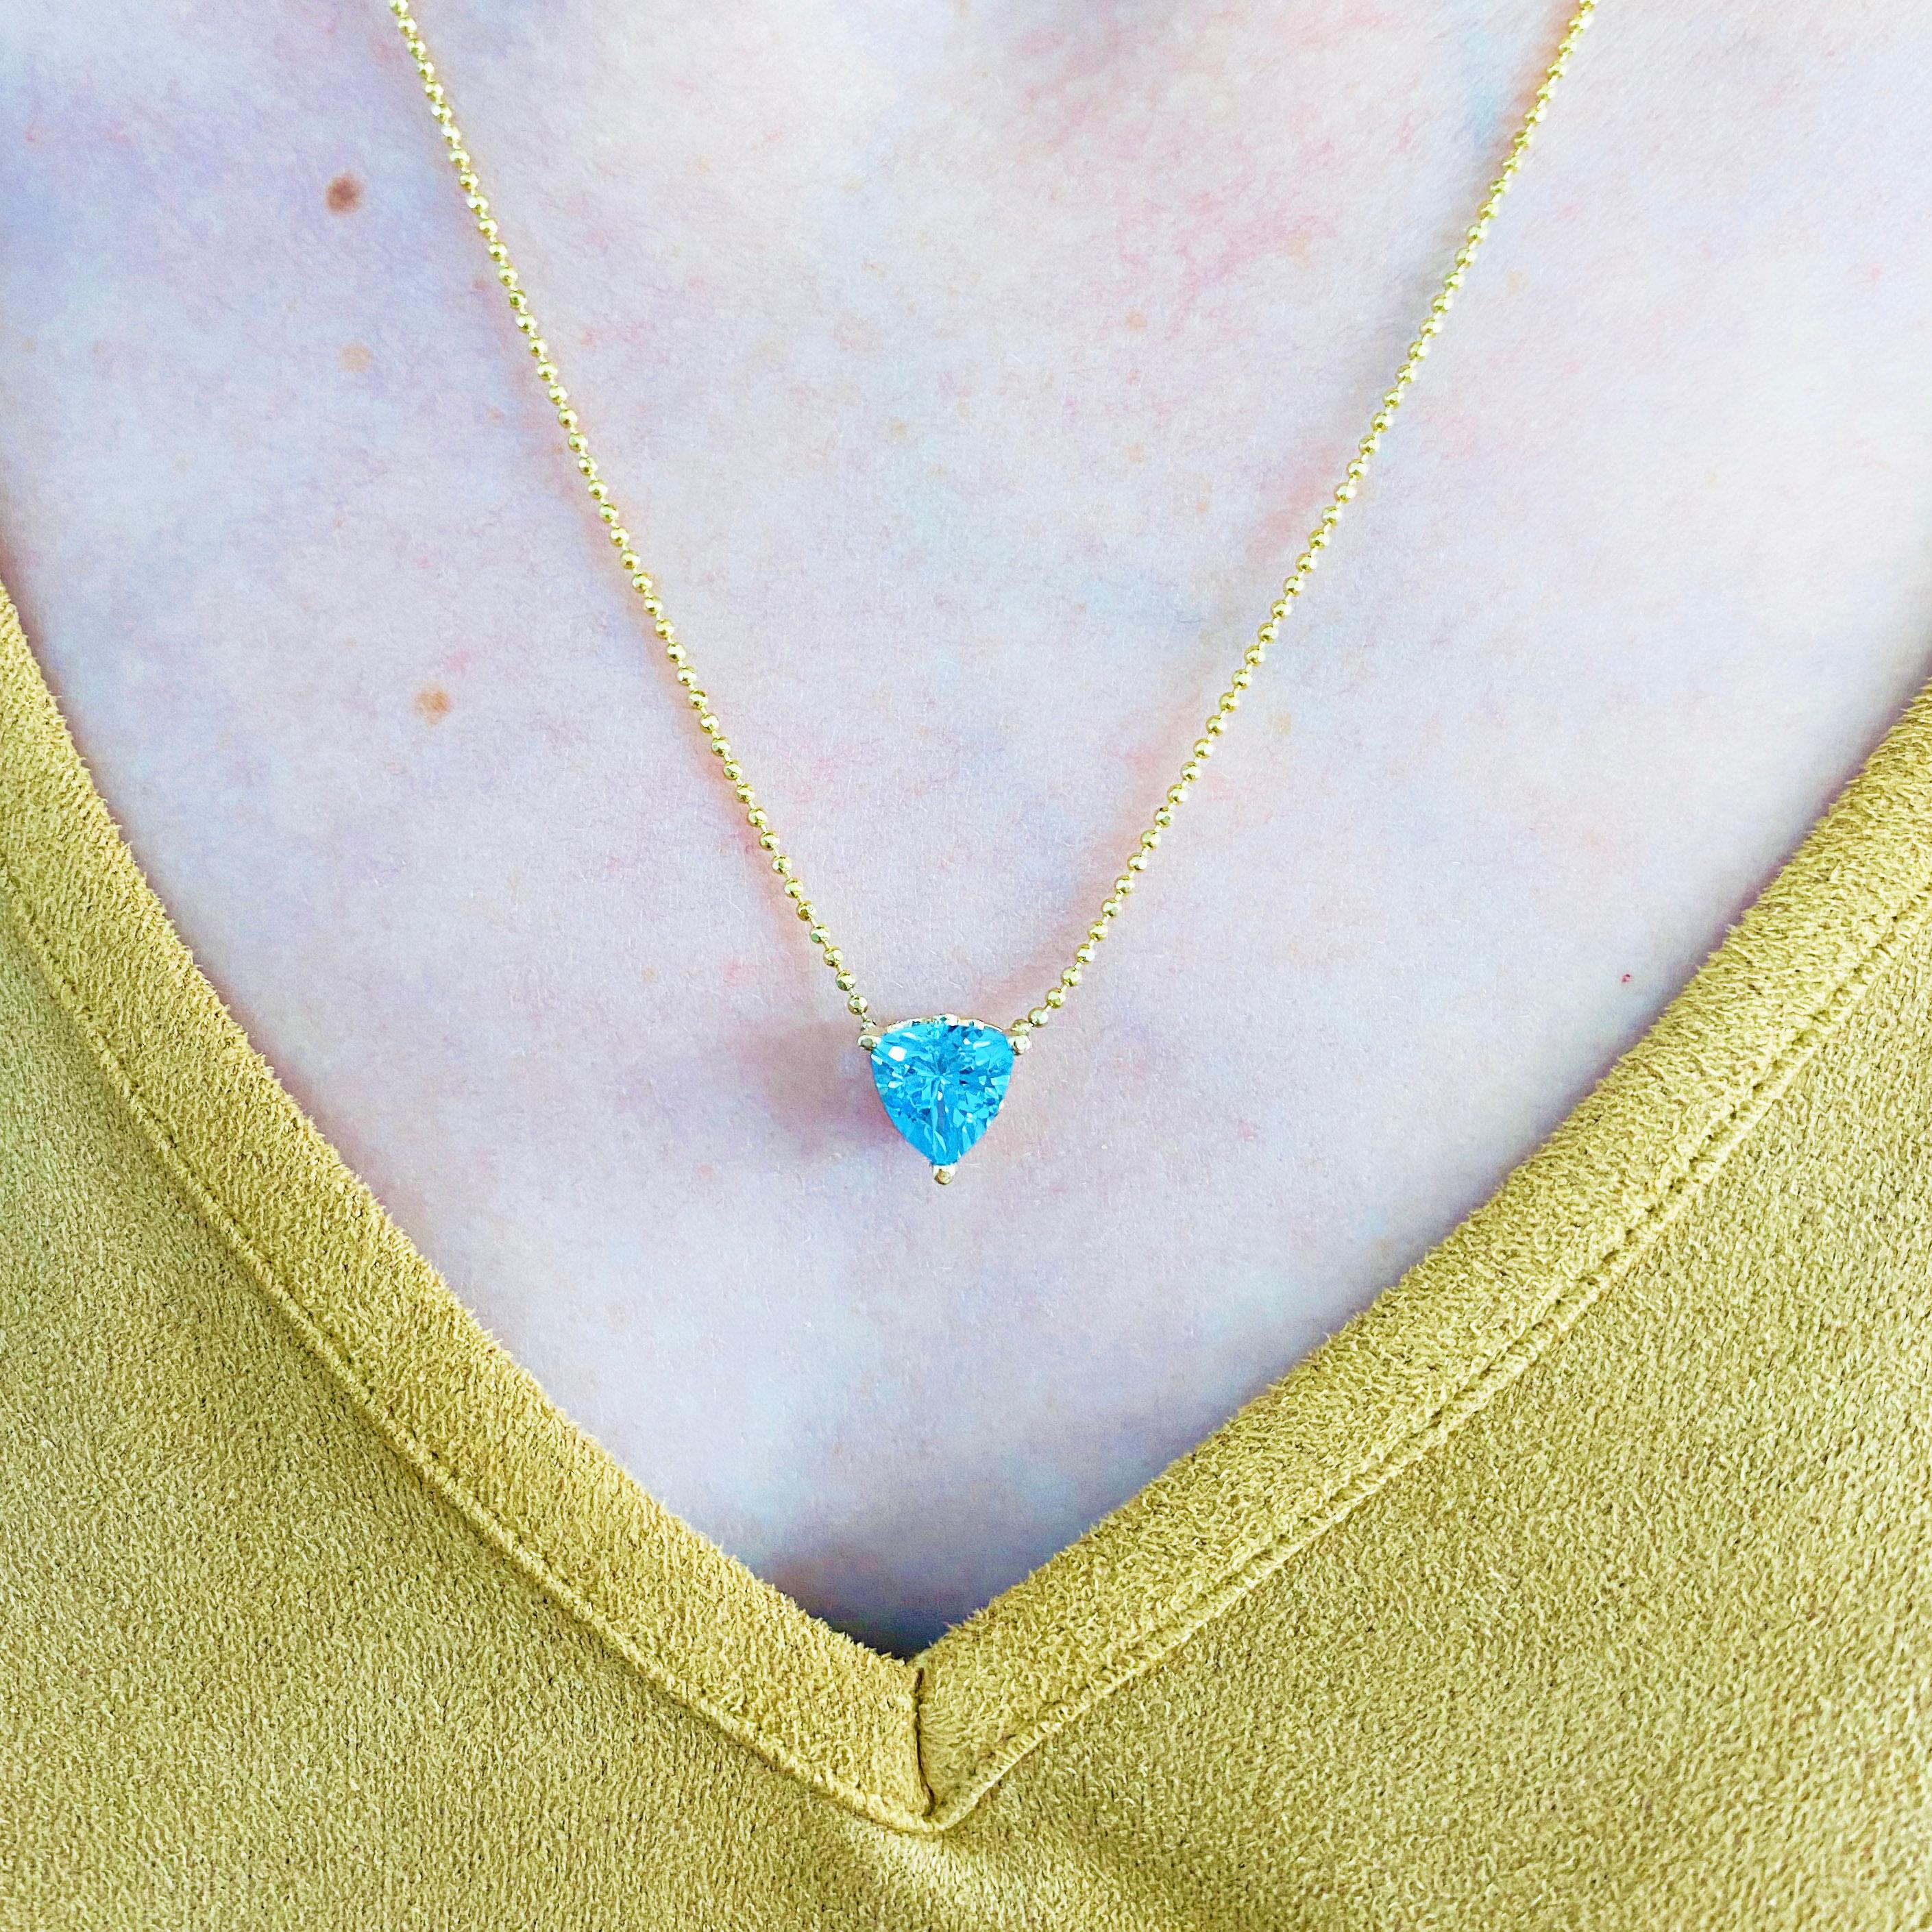 This beautiful vibrant trillion cut Swiss blue topaz set in polished 14k yellow gold was made in our shop by our goldsmiths and provides a look that is very modern yet classic! You won't believe how stunning this stone is. This necklace is made in